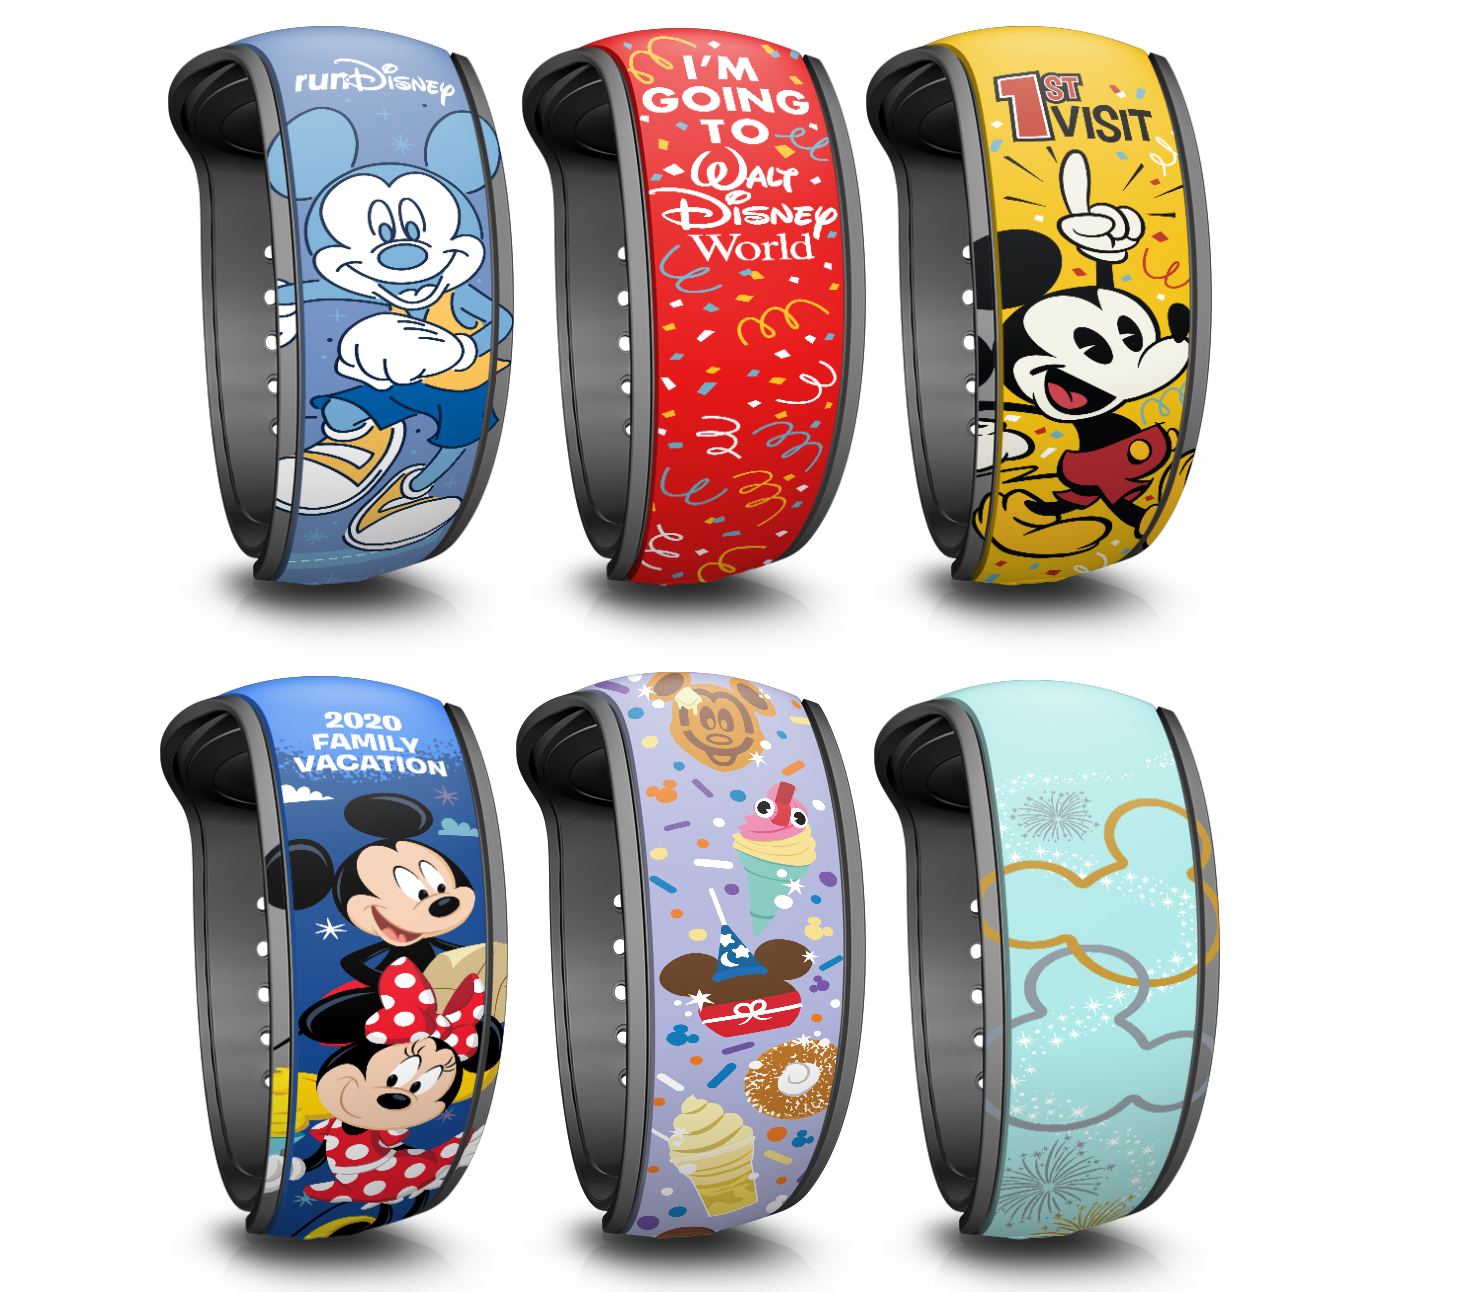 Six new MagicBand designs available as My Disney Experience exclusives